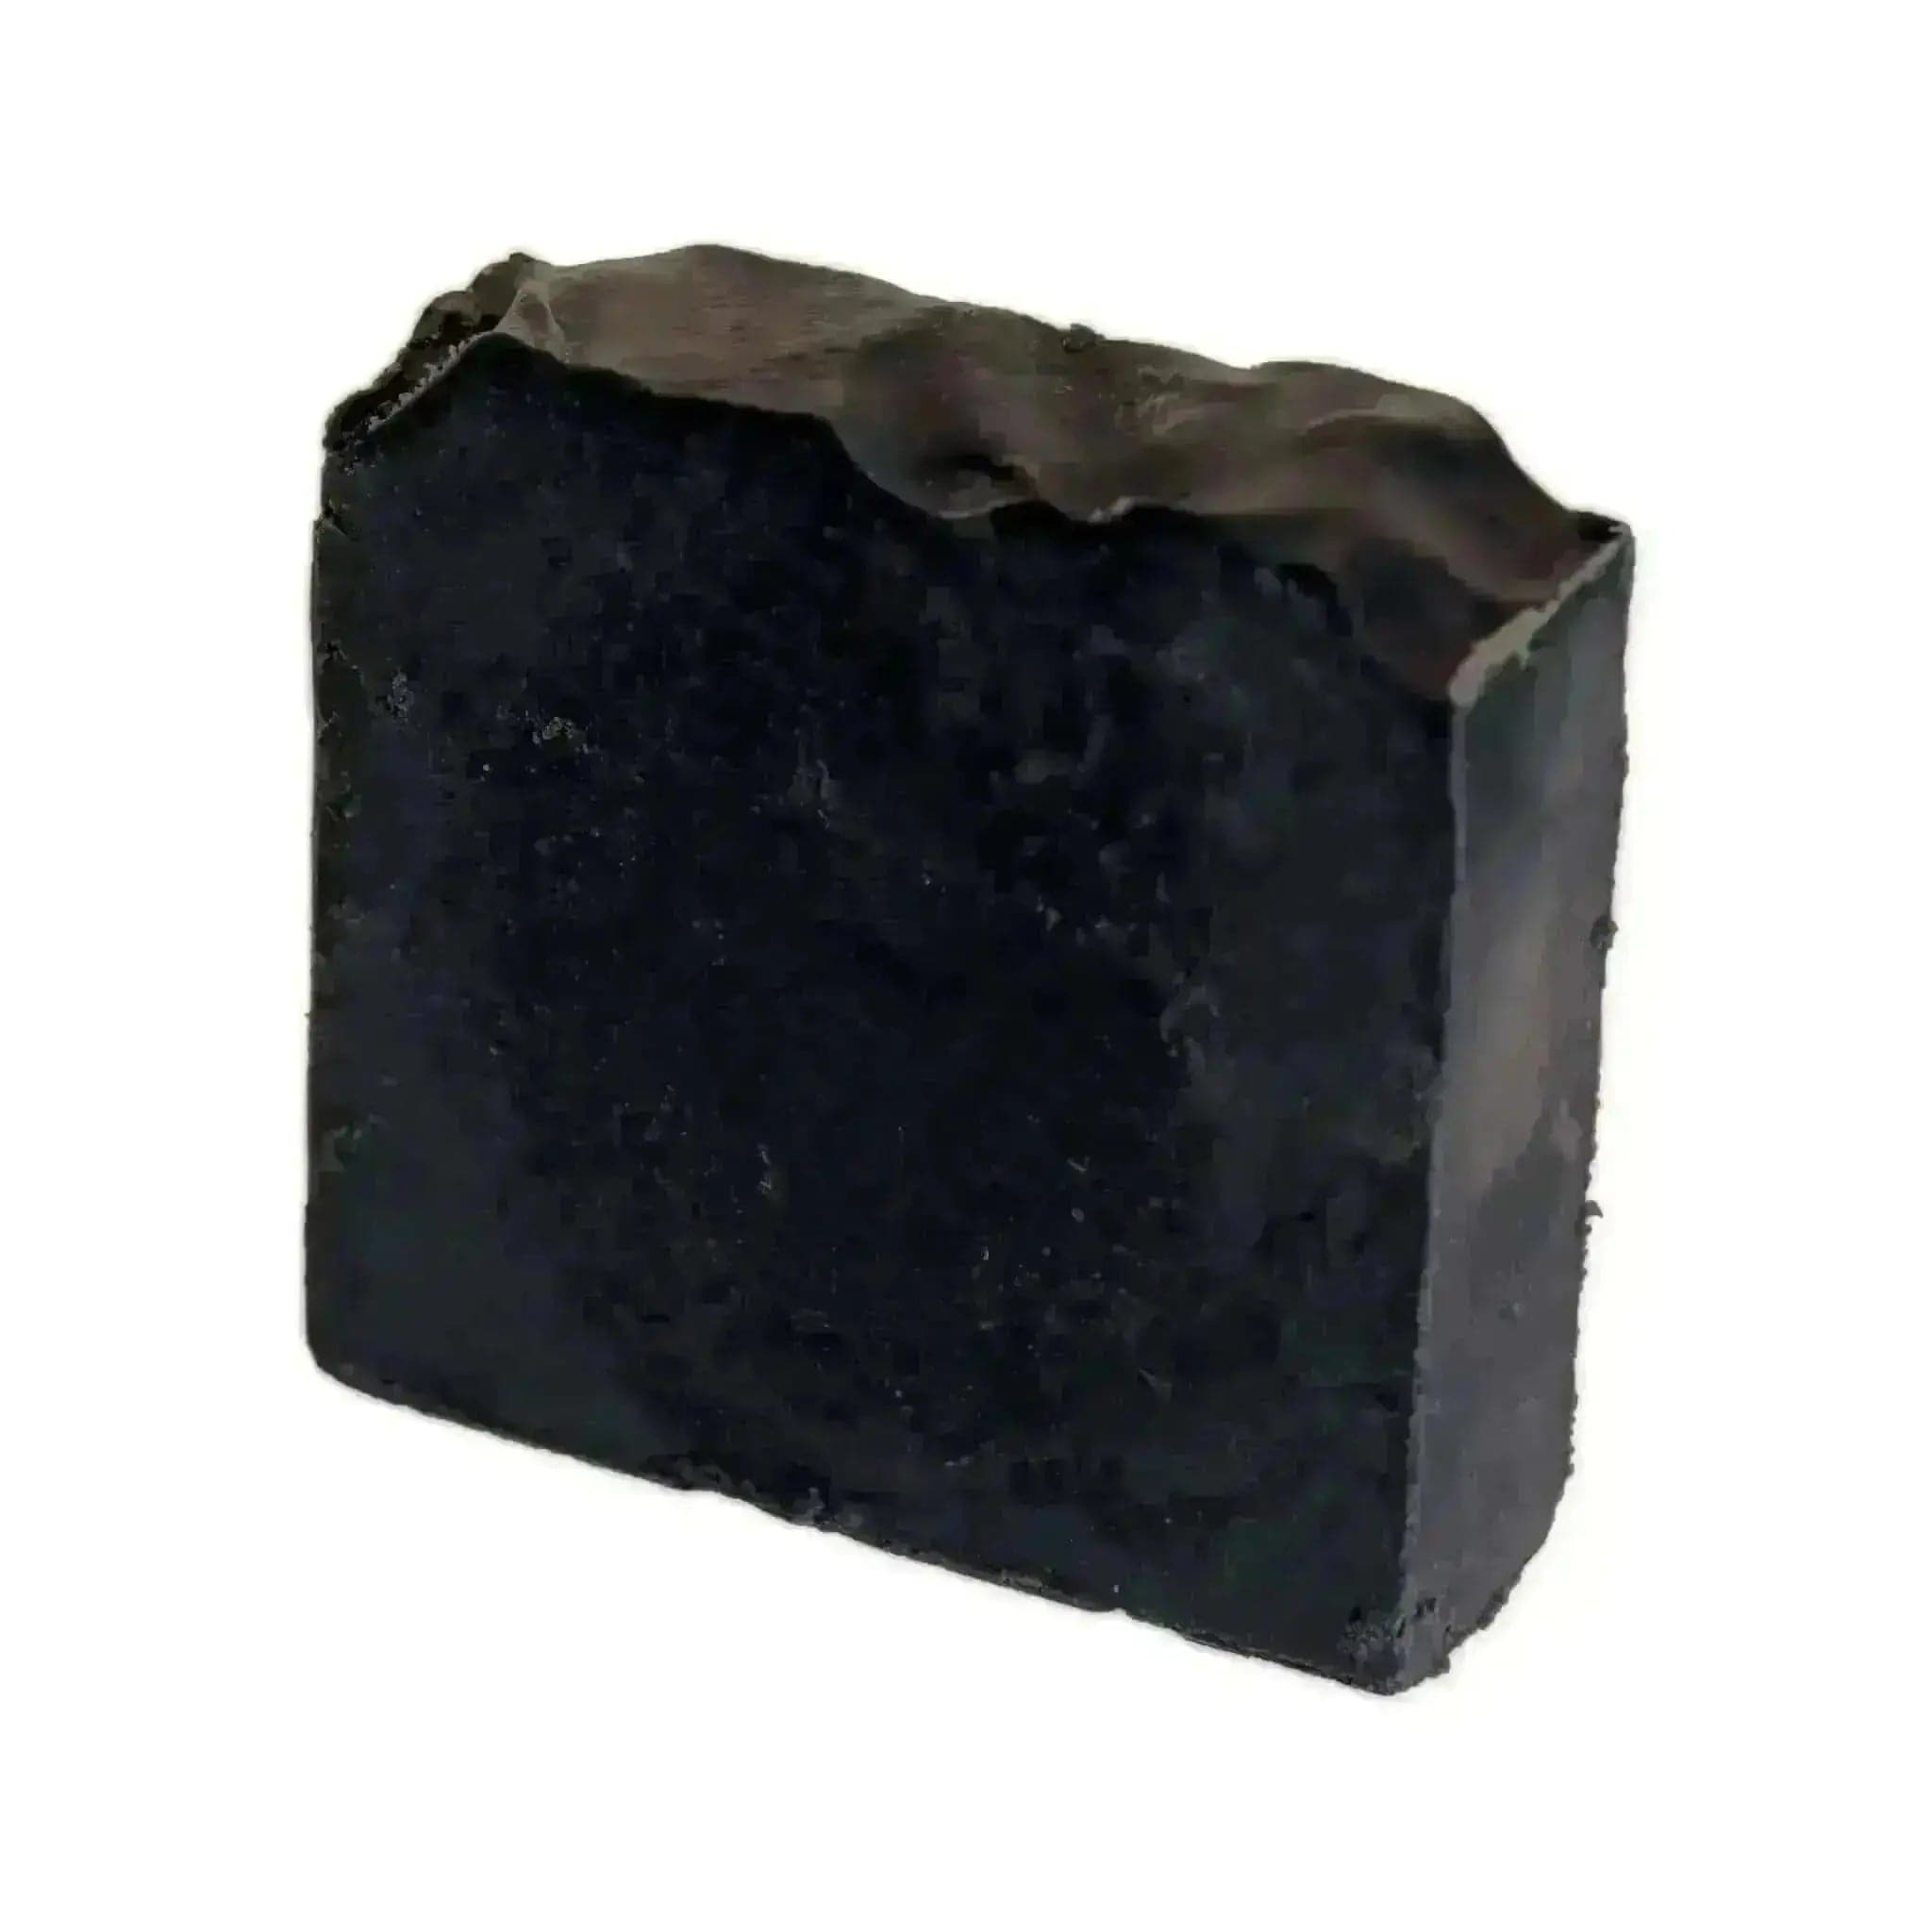 a black block of soap on a white background